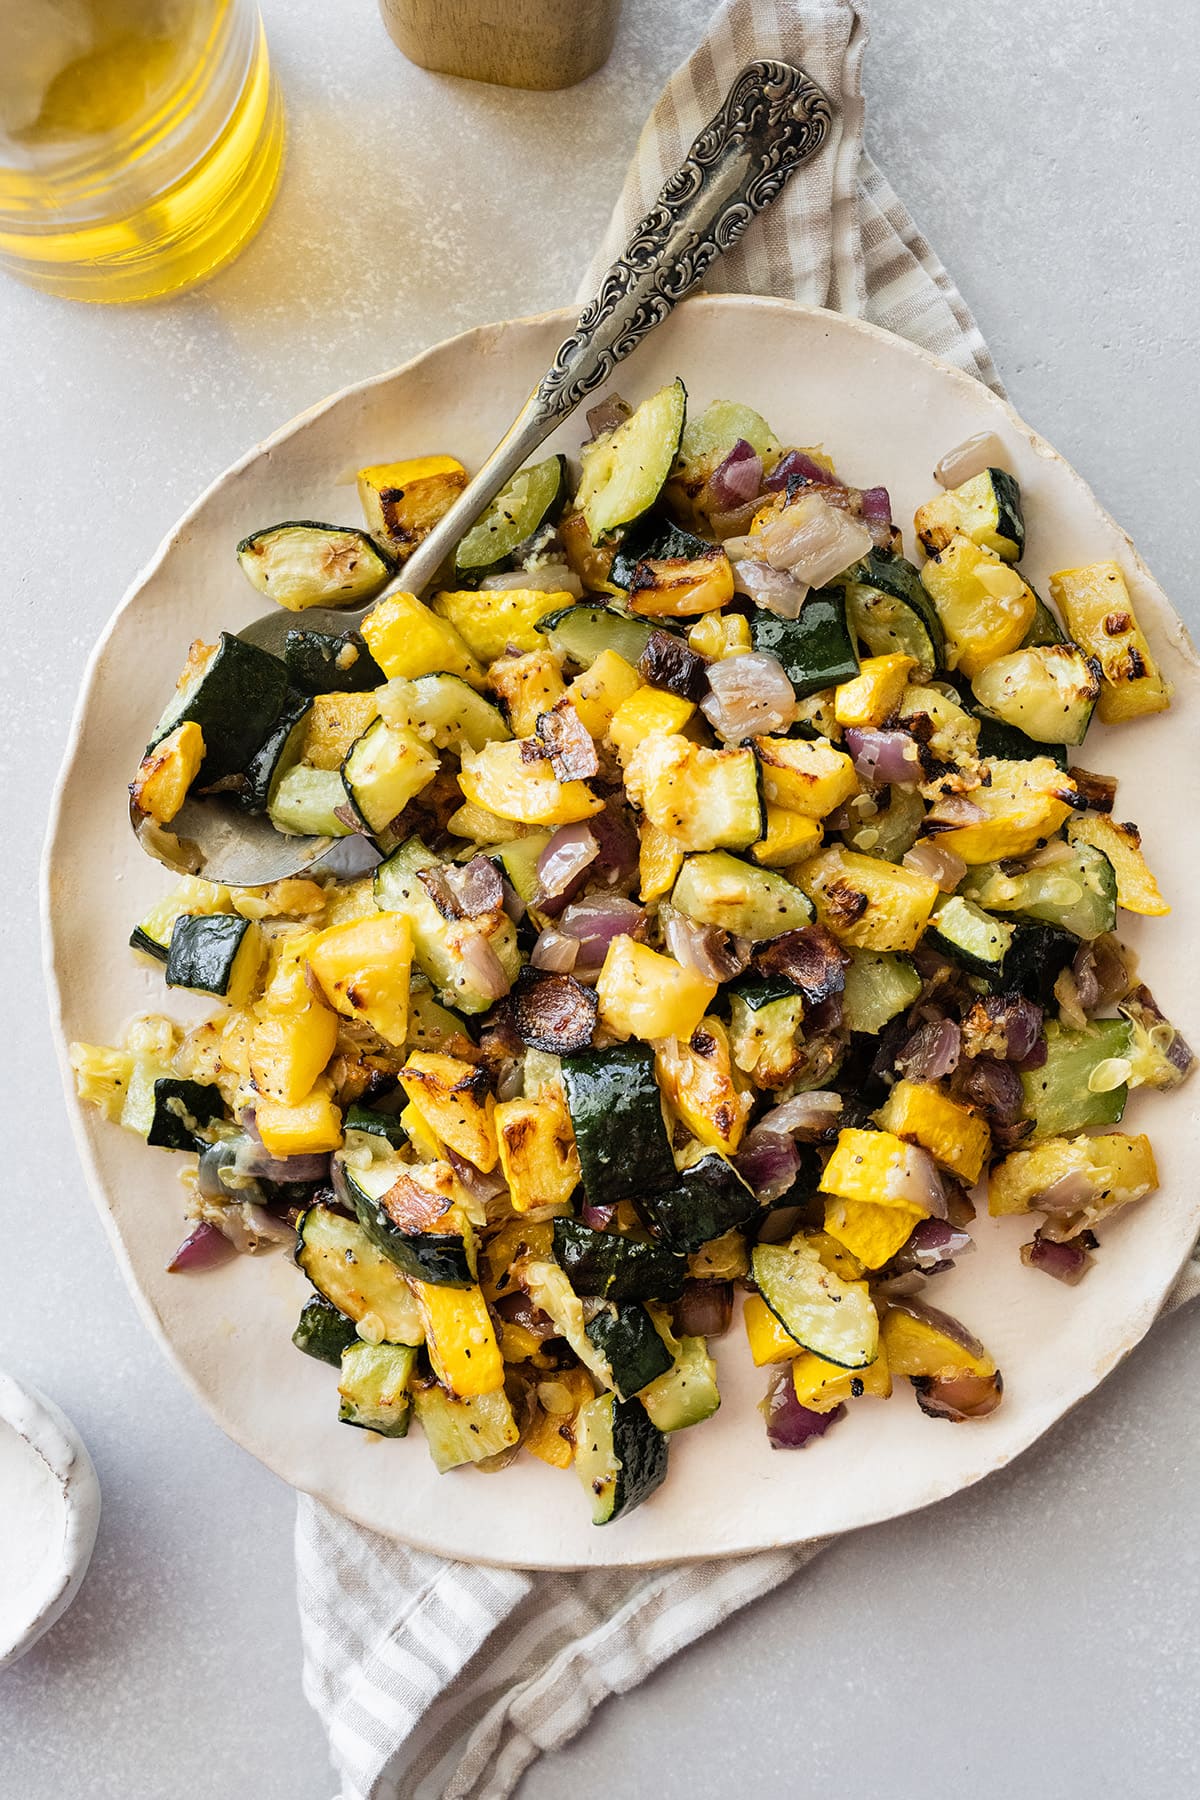 Roasted zucchini and squash on a white plate with a metal spoon.